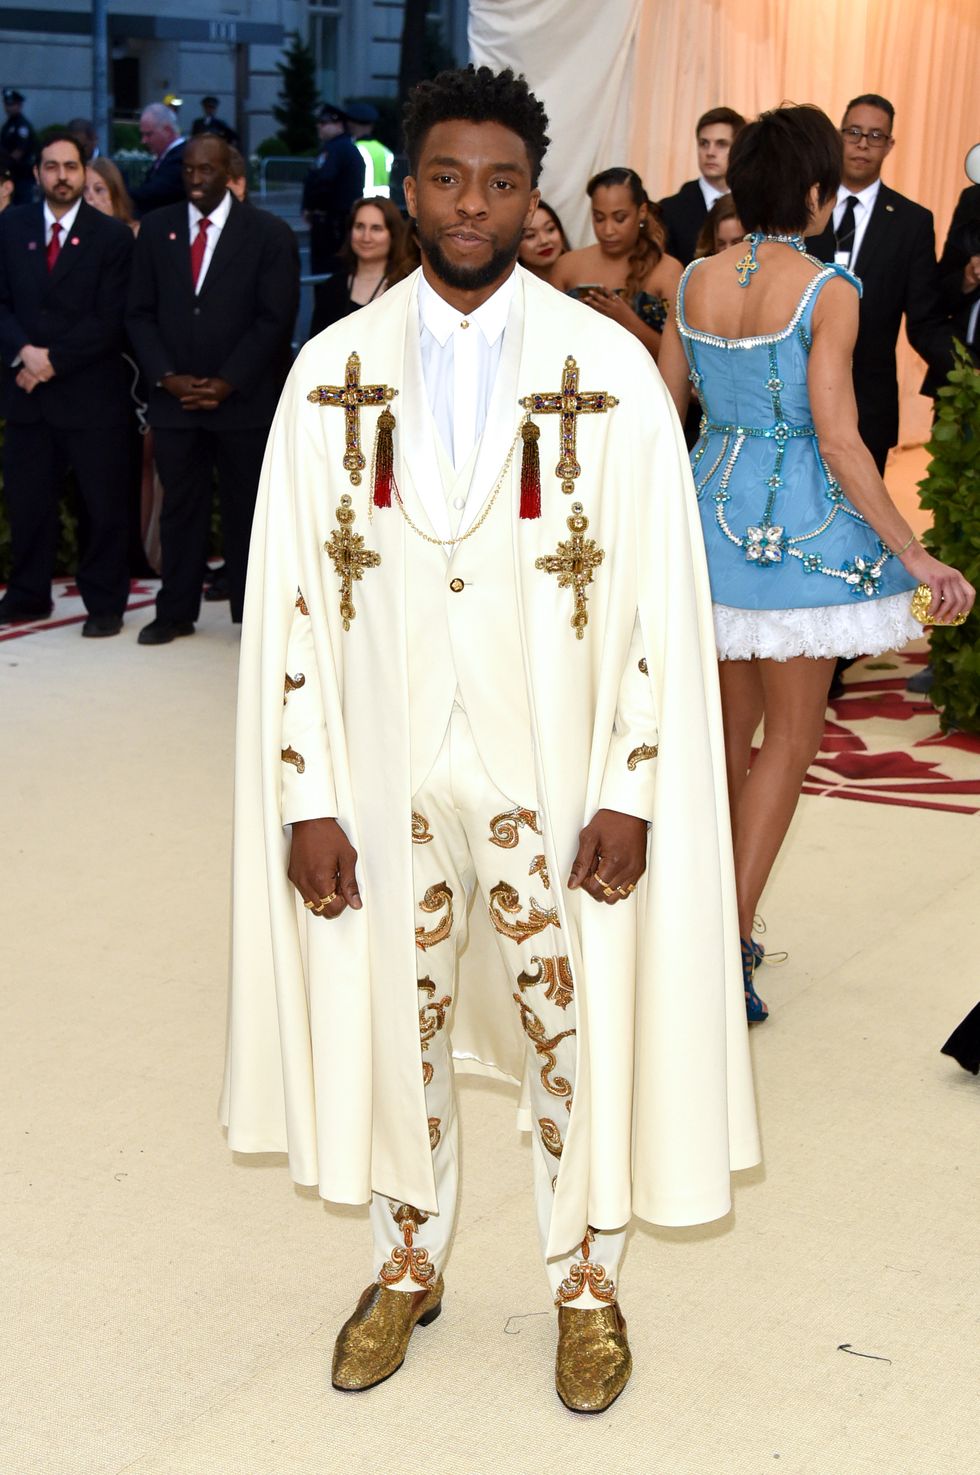 Rite, Event, Fashion, Ceremony, Clergy, Tradition, Deacon, Fashion design, Marriage, Priesthood, 